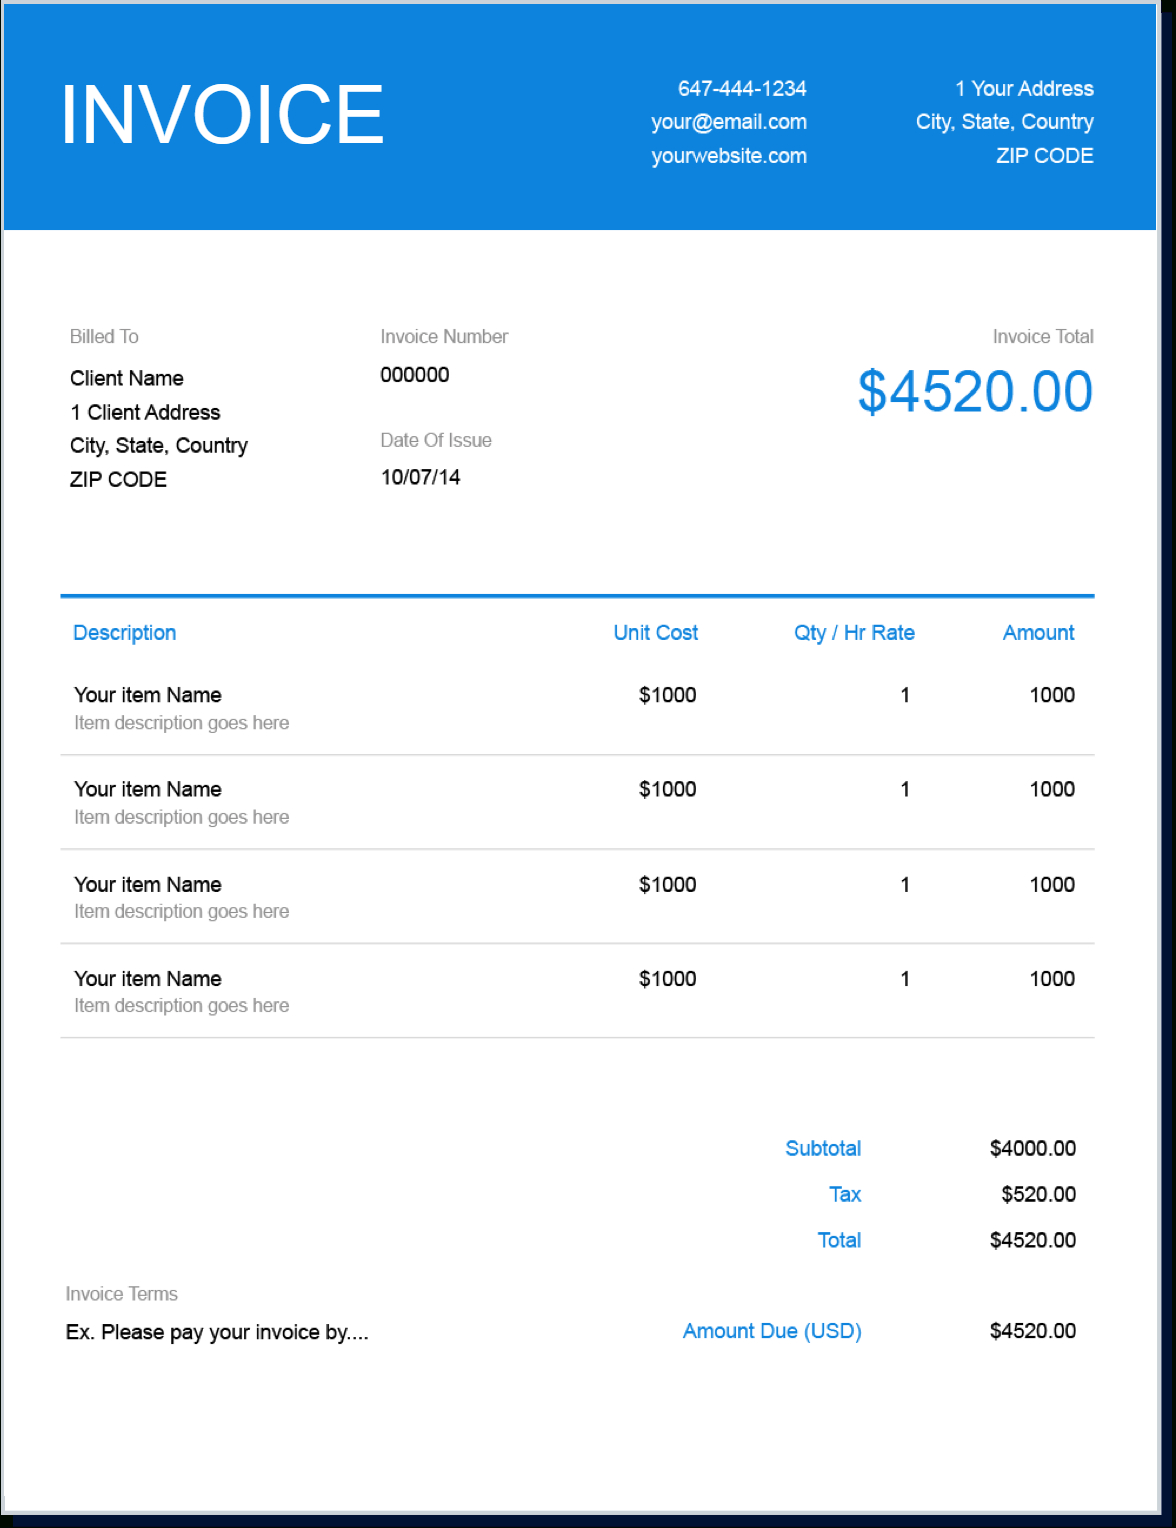 Invoice Template | Create And Send Free Invoices Instantly Intended For Web Design Invoice Template Word